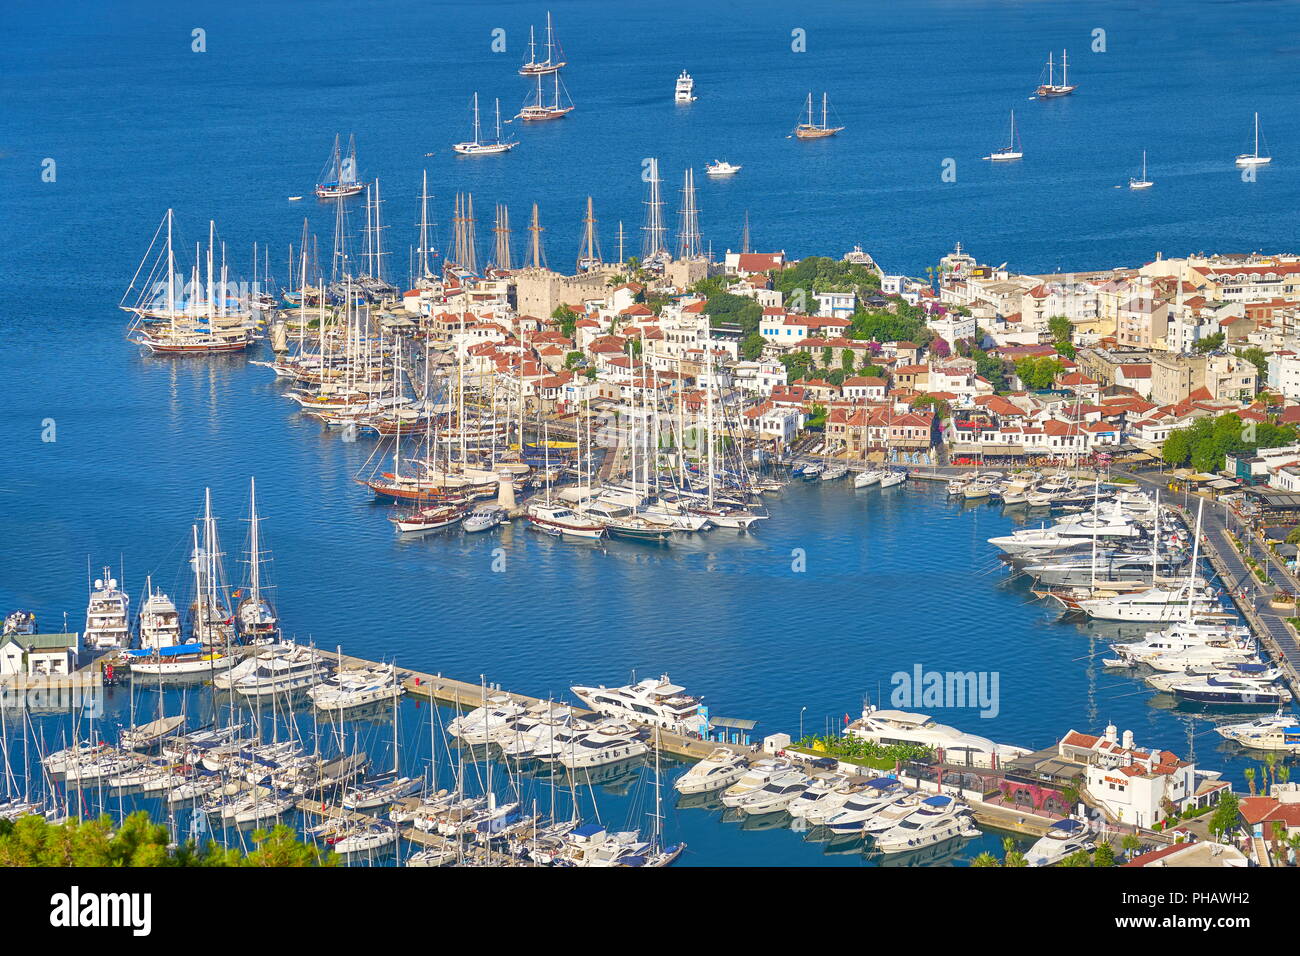 Marmaris Old Town and Harbour, Turkey Stock Photo